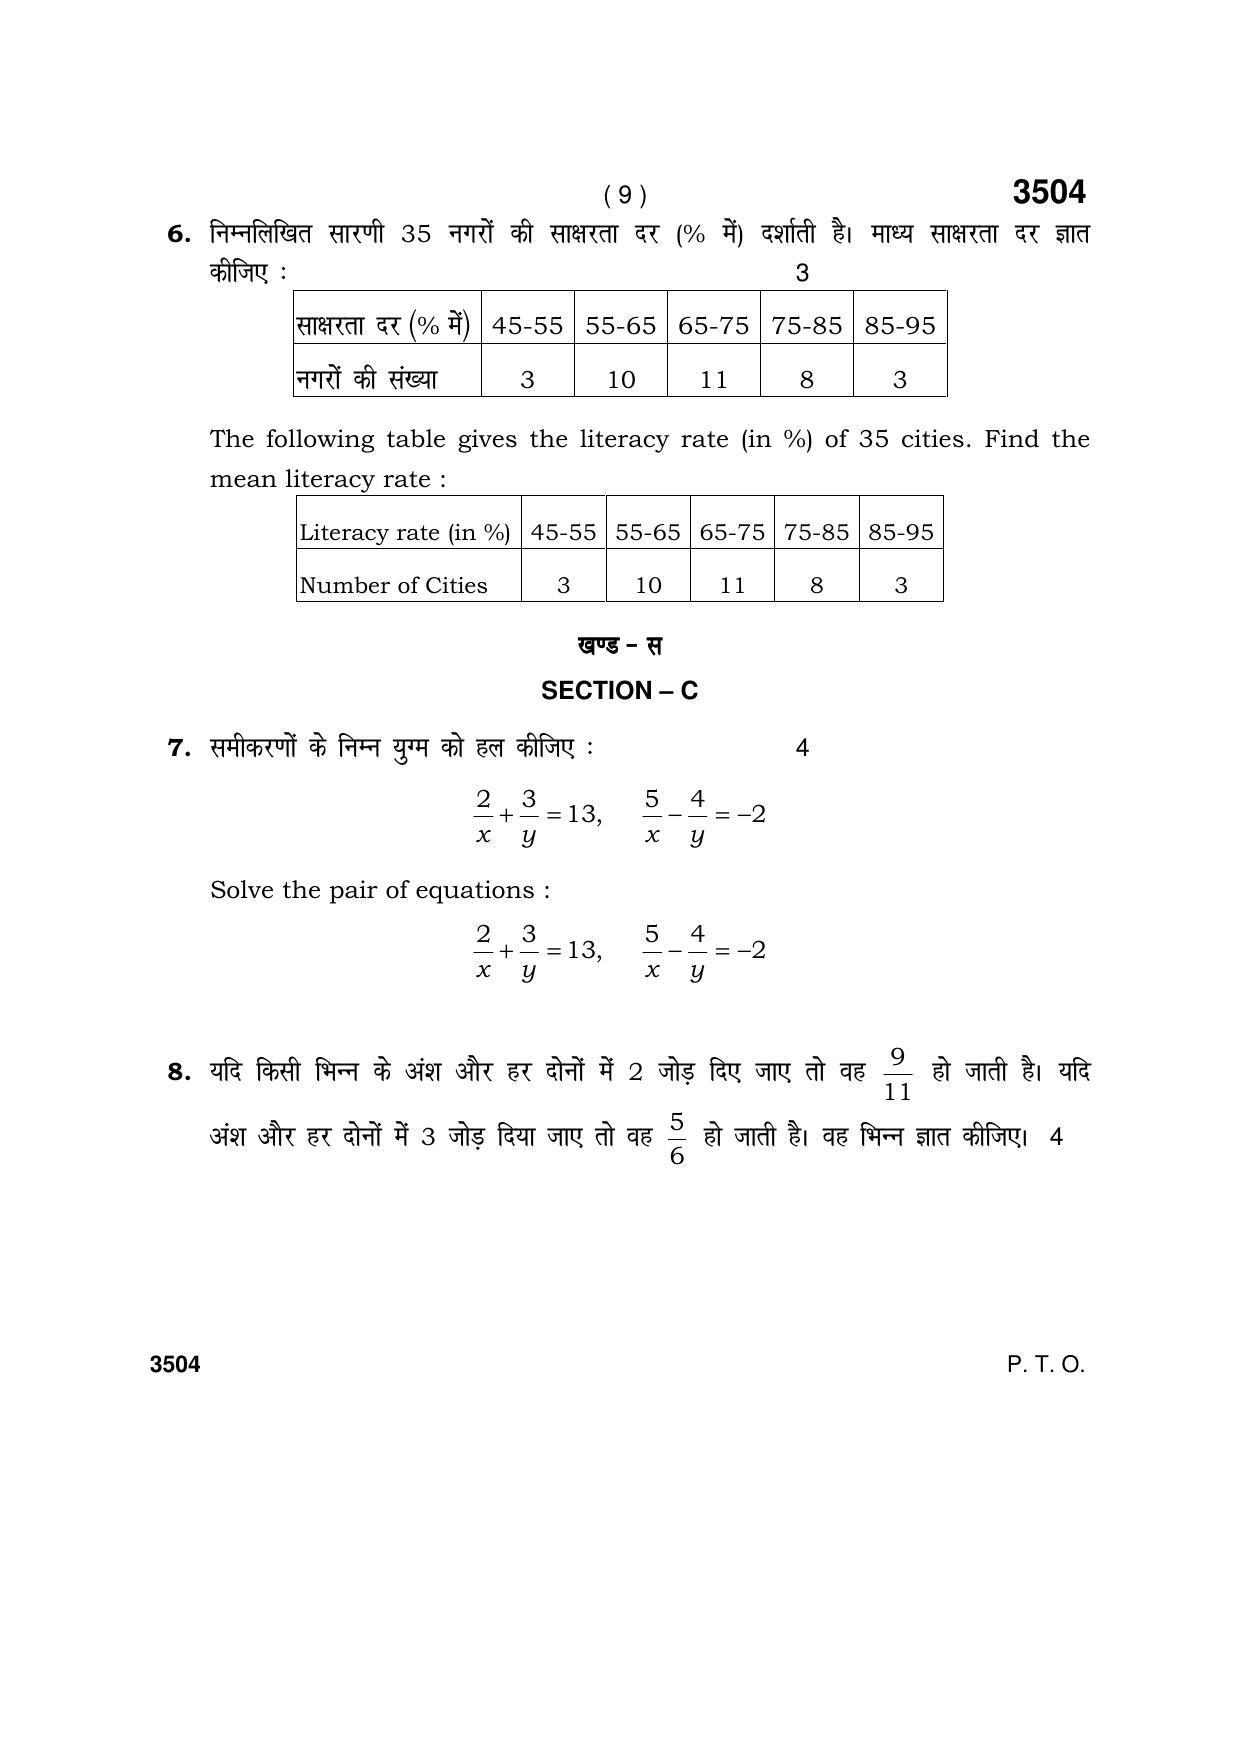 Haryana Board HBSE Class 10 Mathematics (Blind c) 2018 Question Paper - Page 9